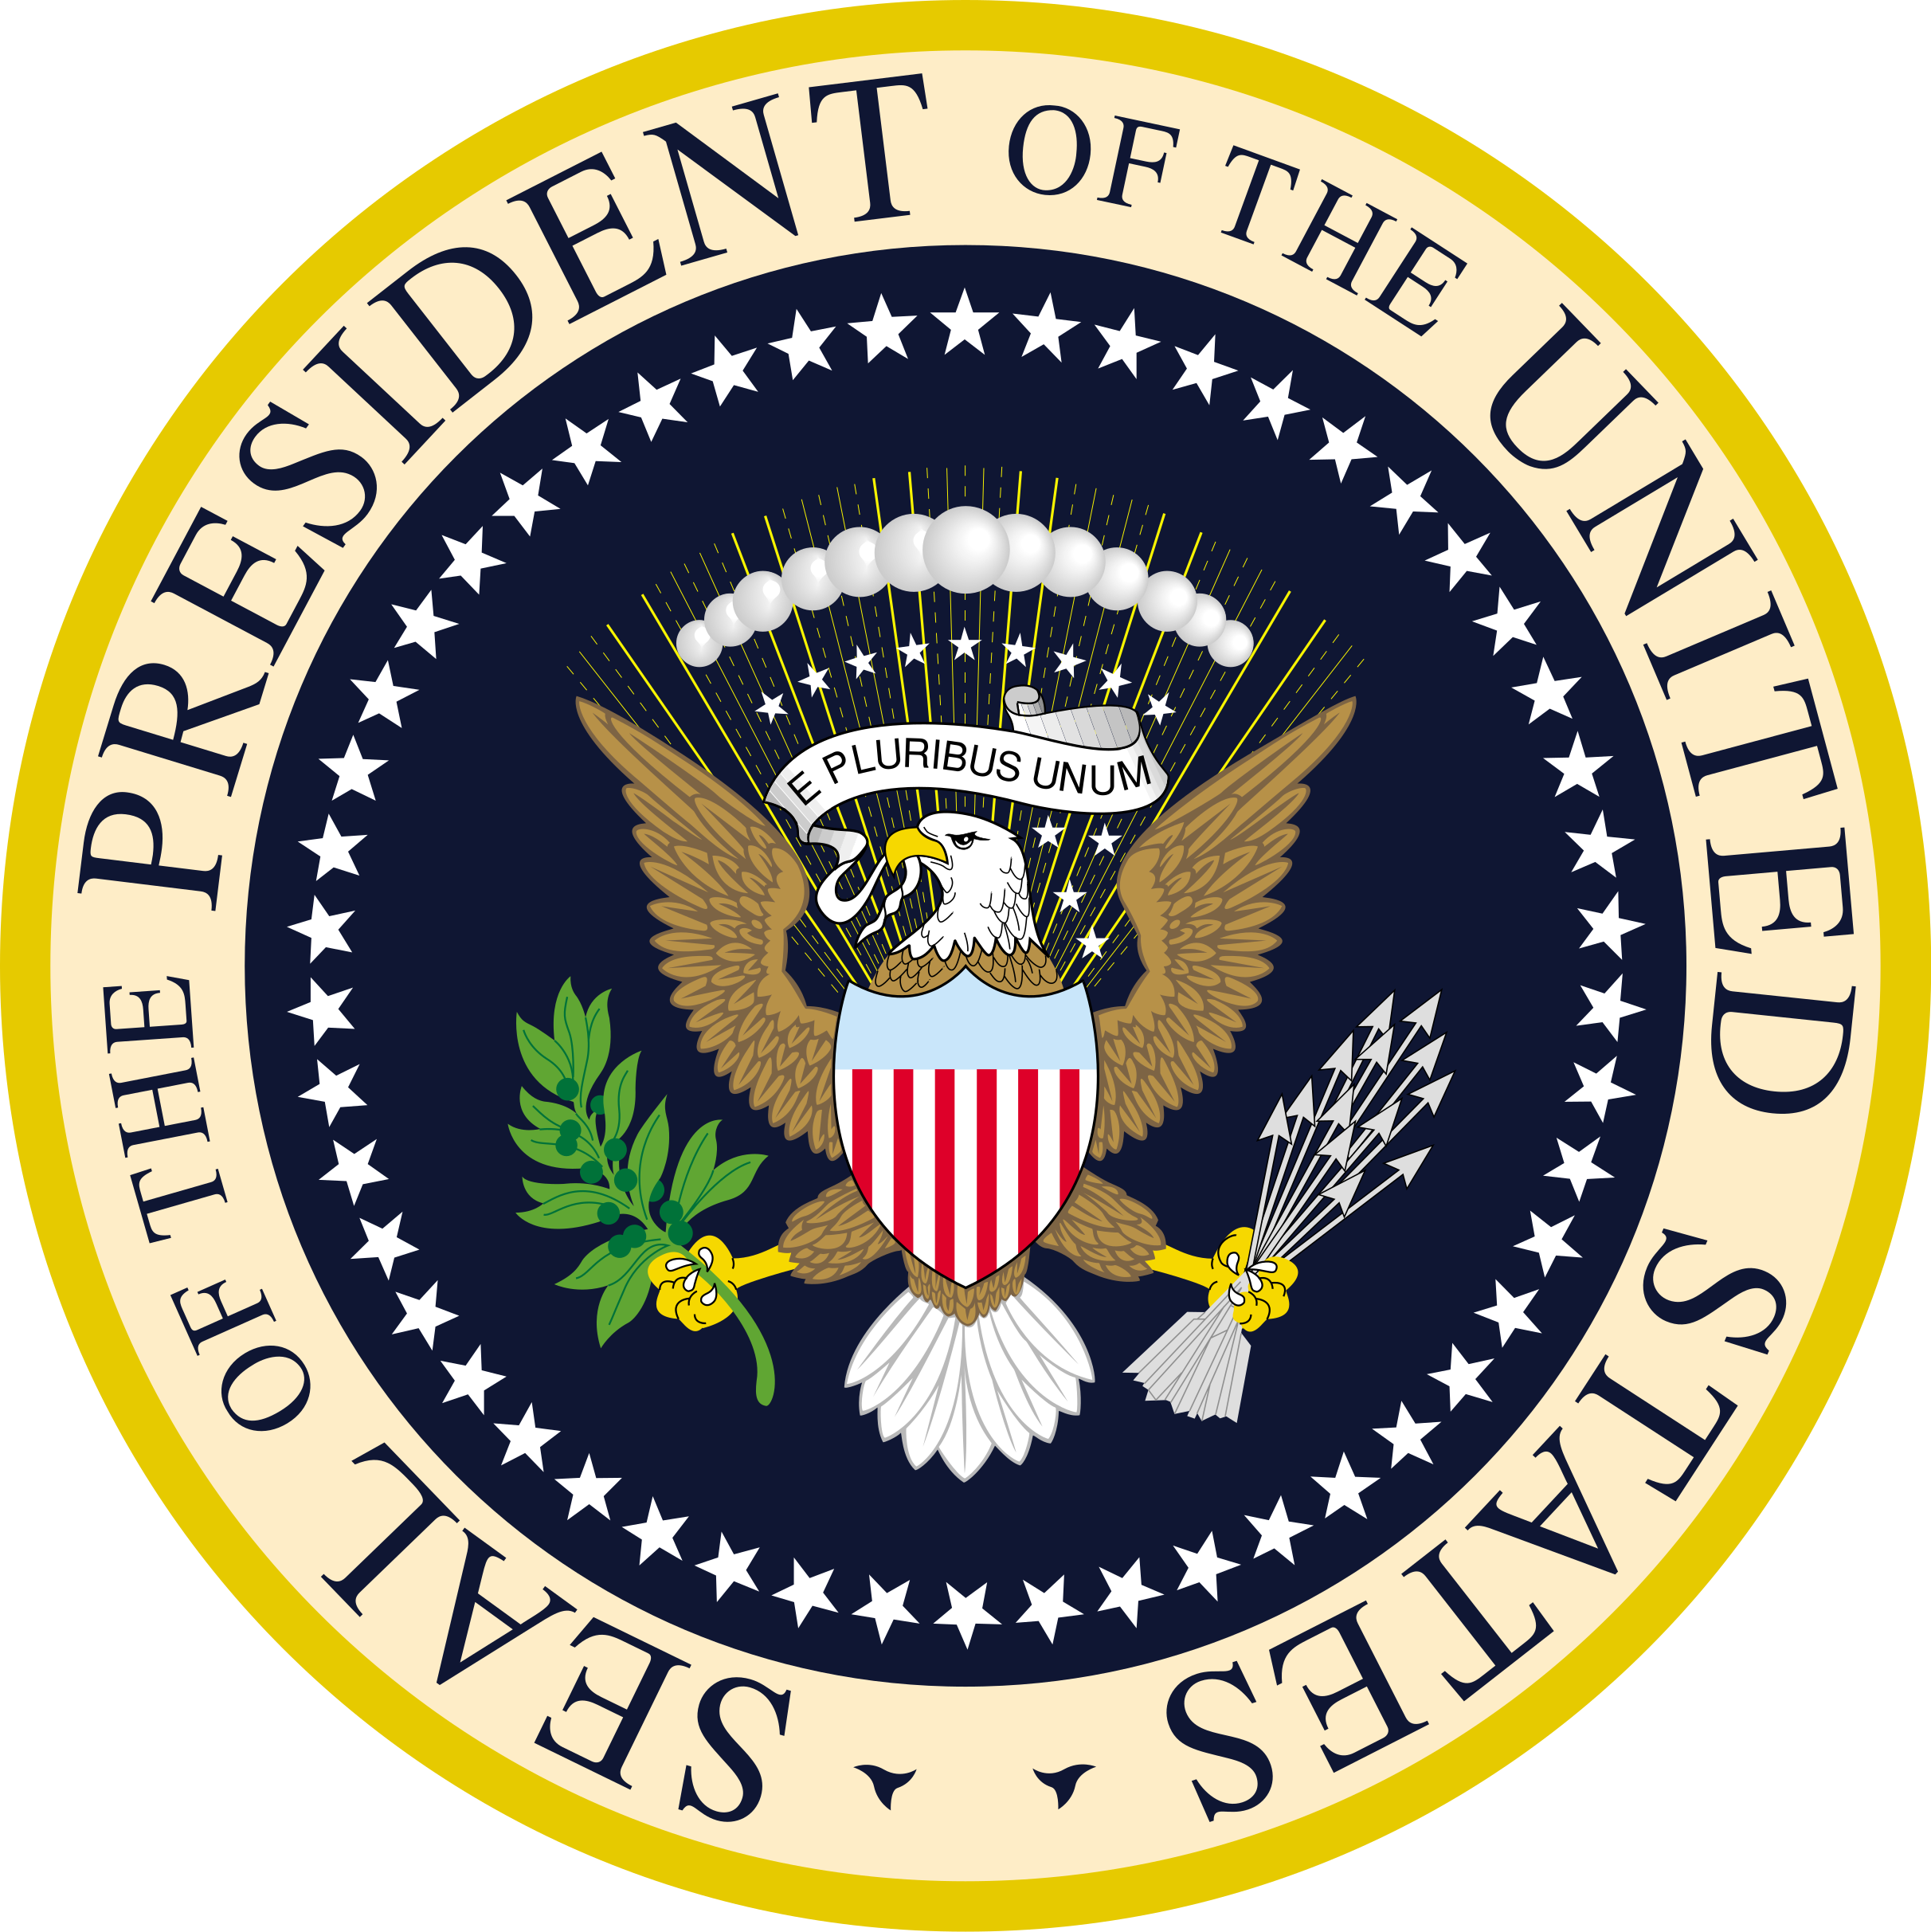 GRAPHIC: Seal of the President of the United States of America. Graphic courtesy of Wikimedia Commons.